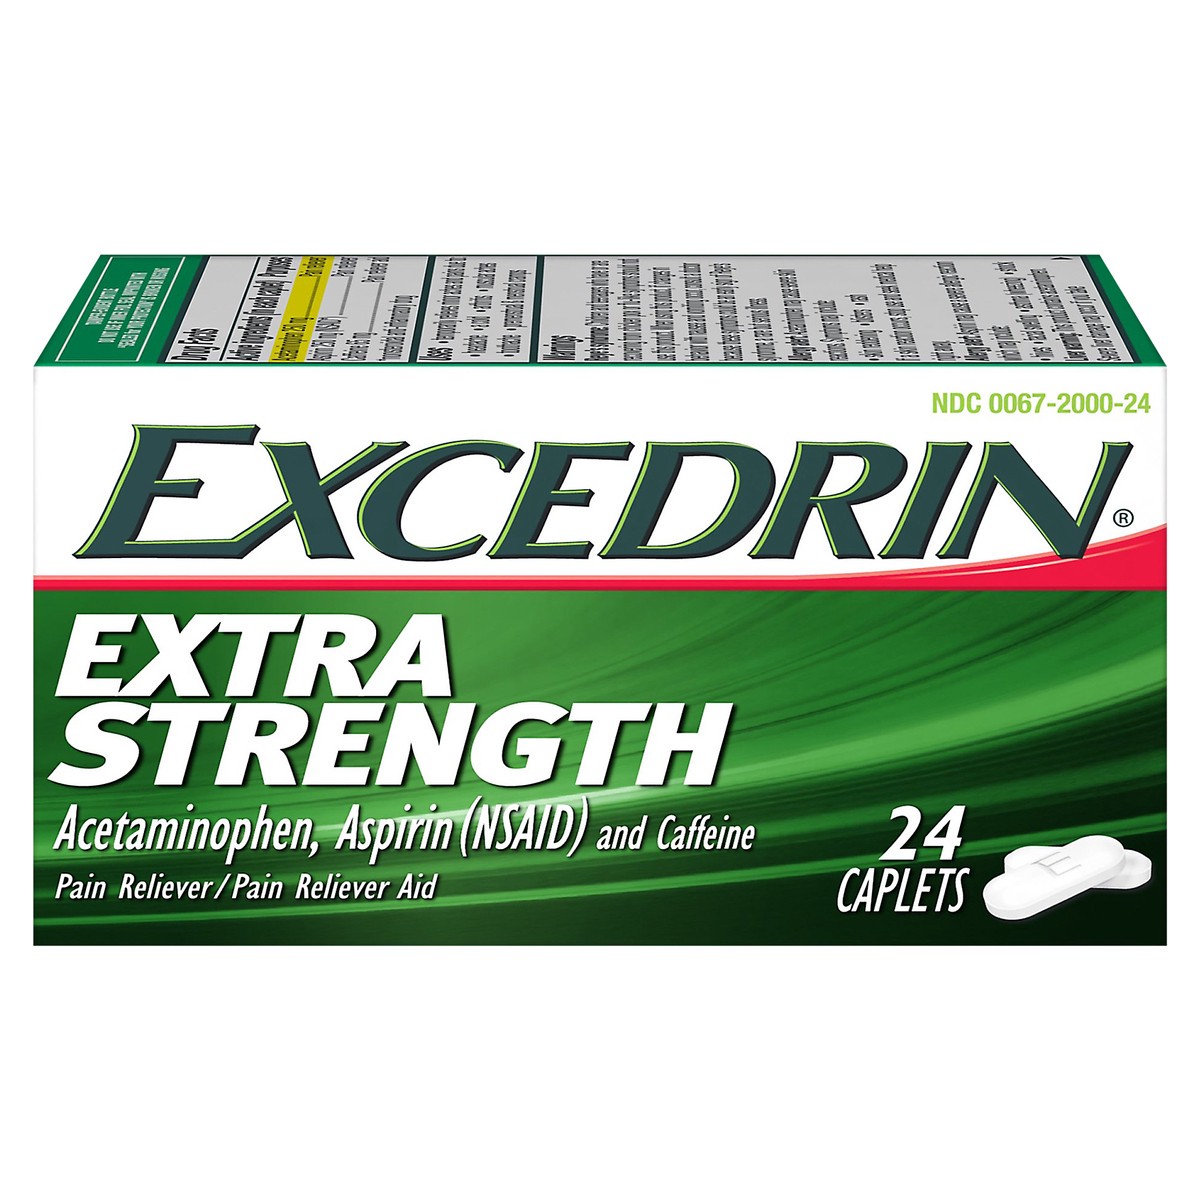 slide 1 of 9, Excedrin Extra Strength Pain Reliever / Pain Reliever Aid Caplets, 24 ct